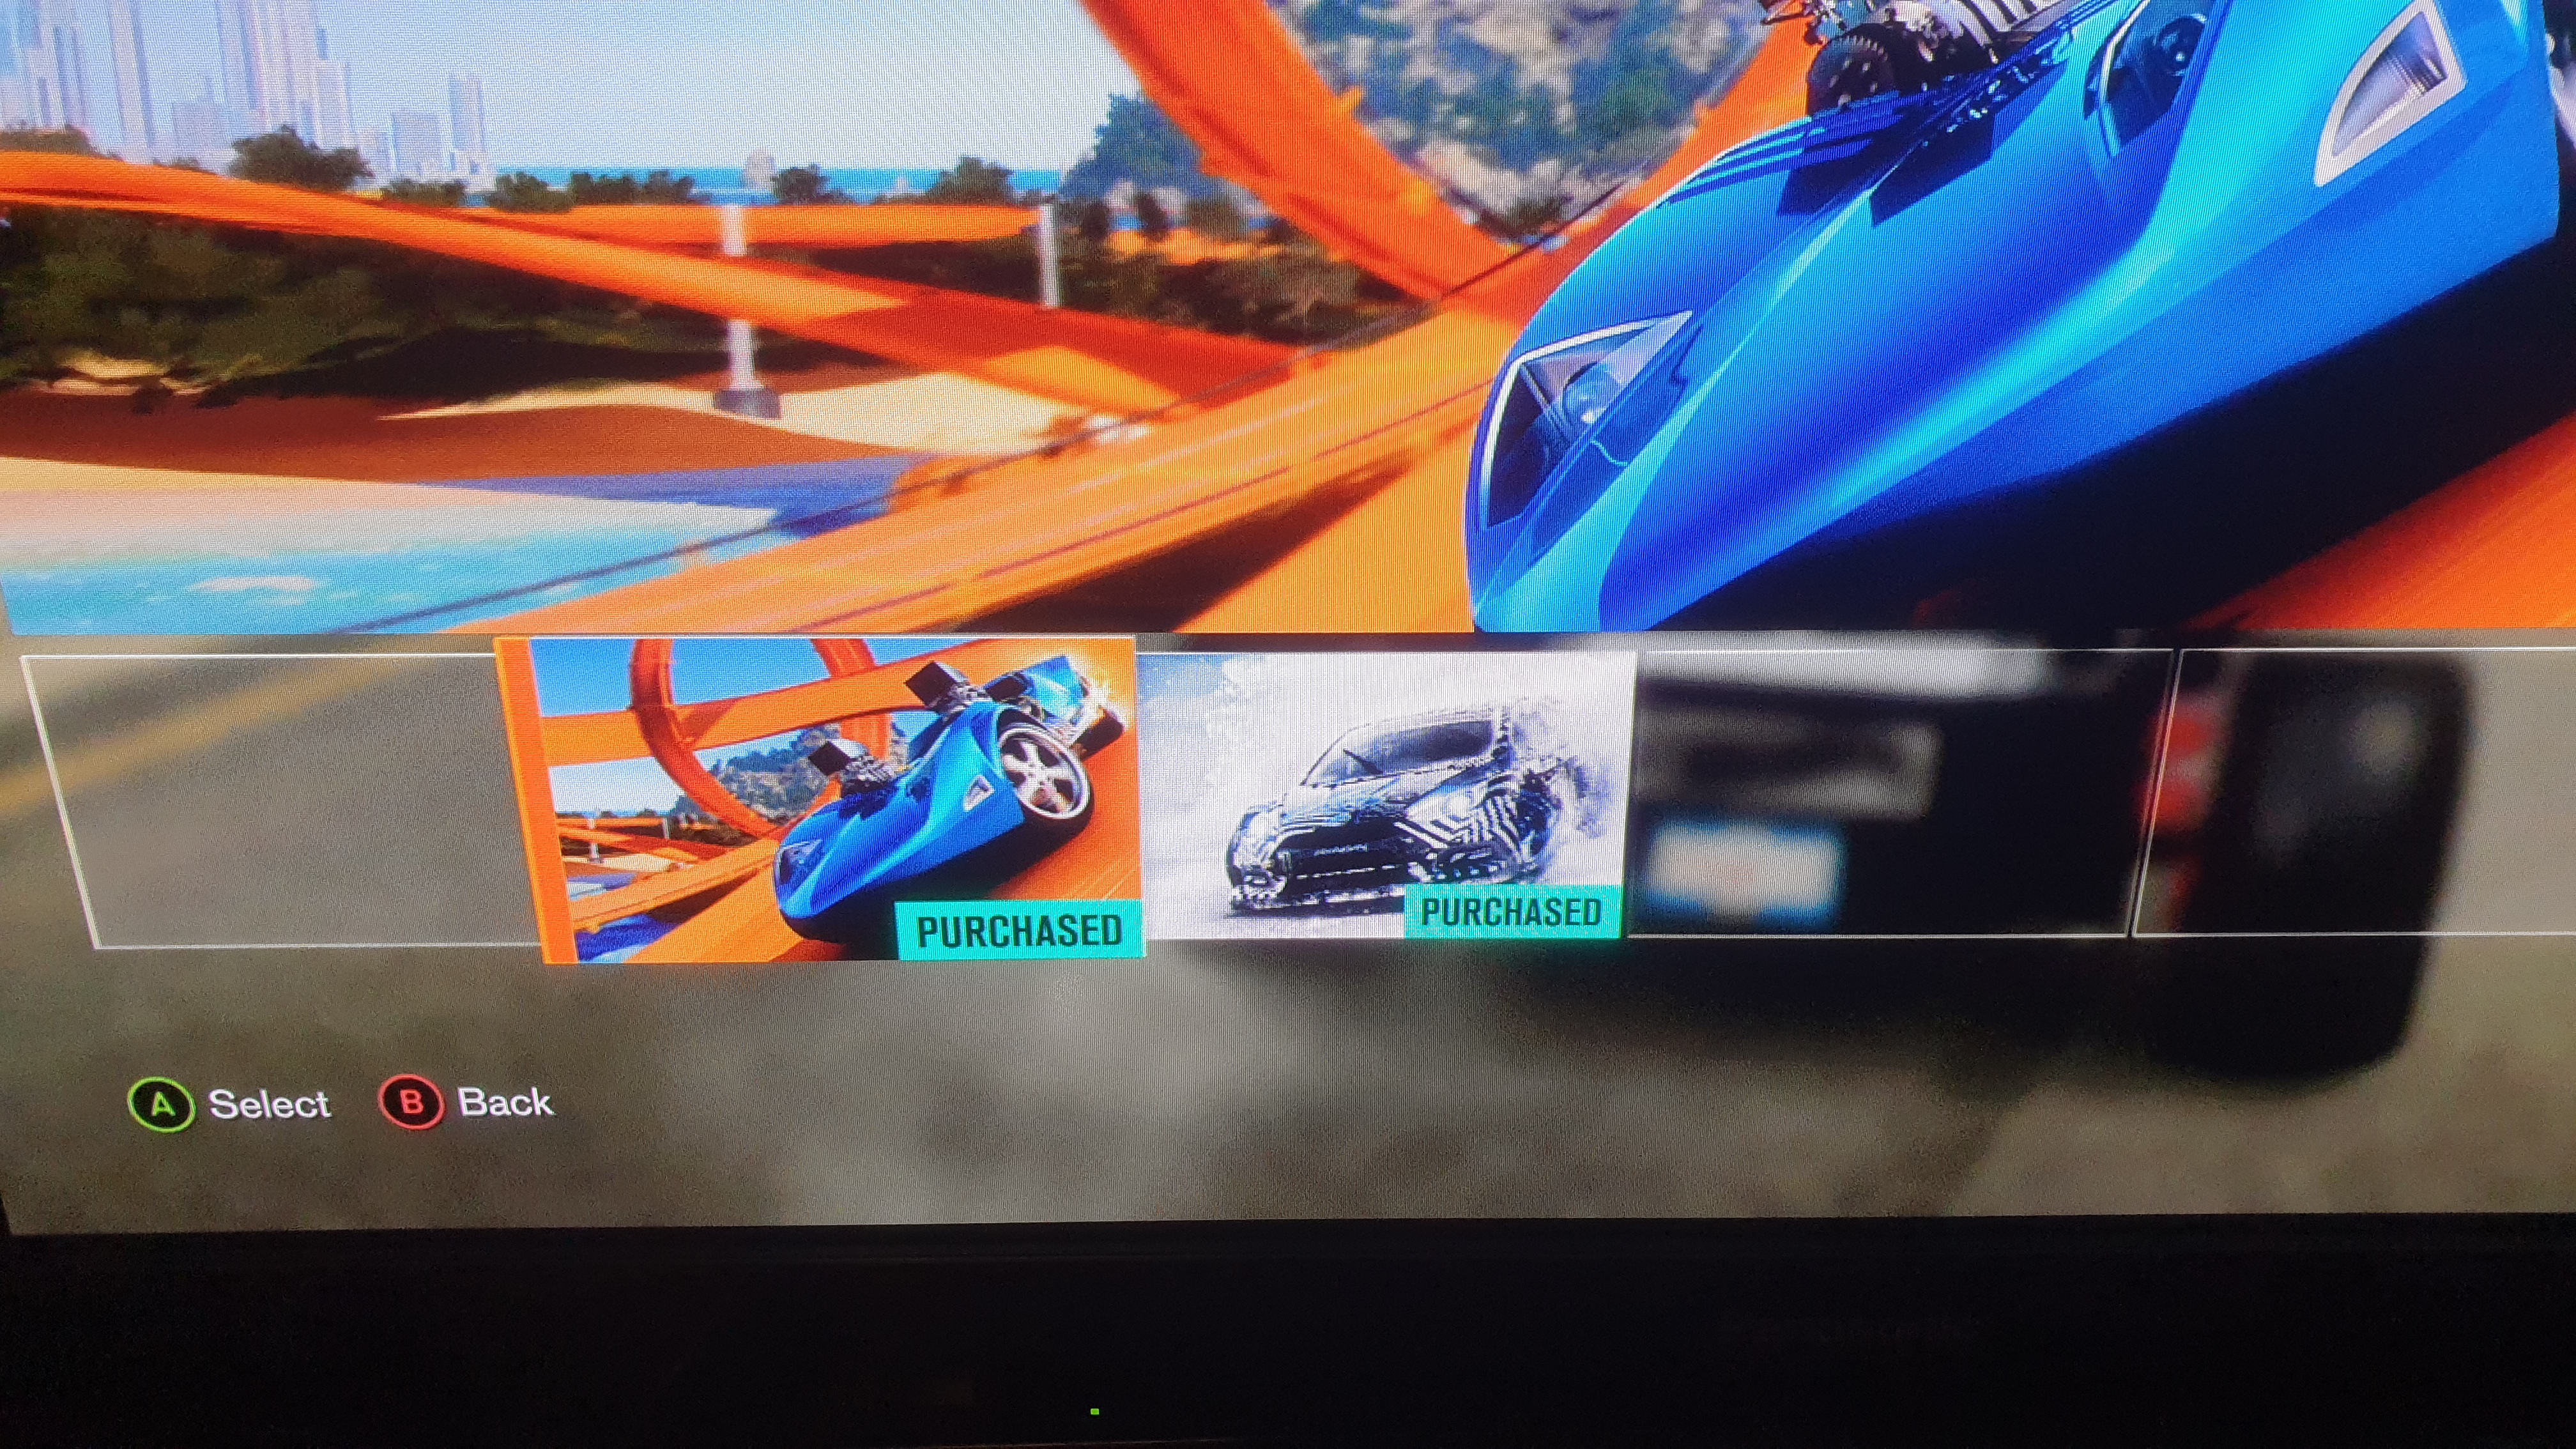 Forza Horizon 3 windows 10 how to download to computer and install the  game? - FH3 Discussion - Official Forza Community Forums